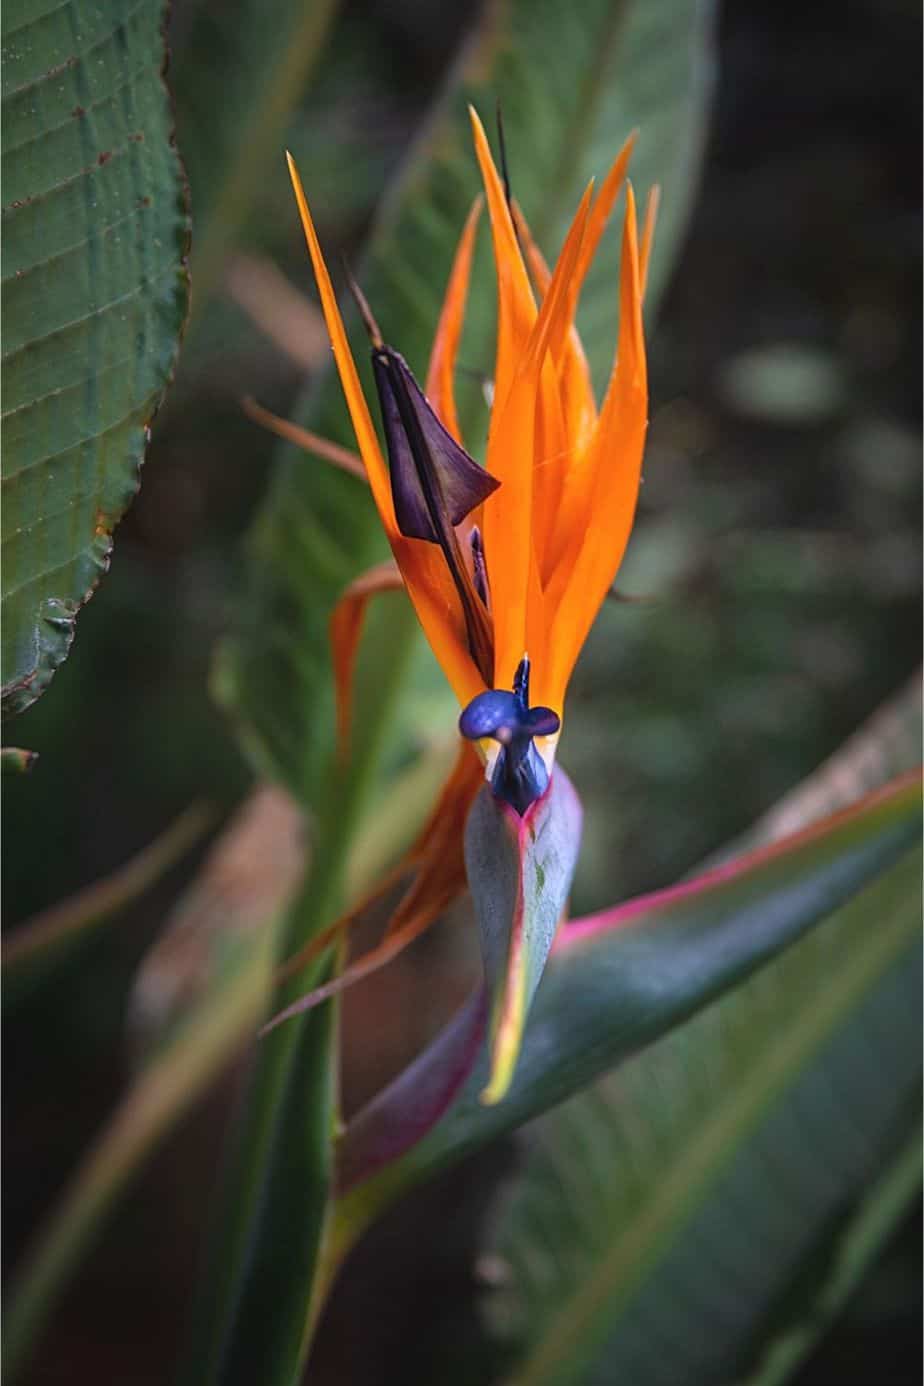 Bird of Paradise is a great tropical ornamental plant to spice up your southeast-facing window